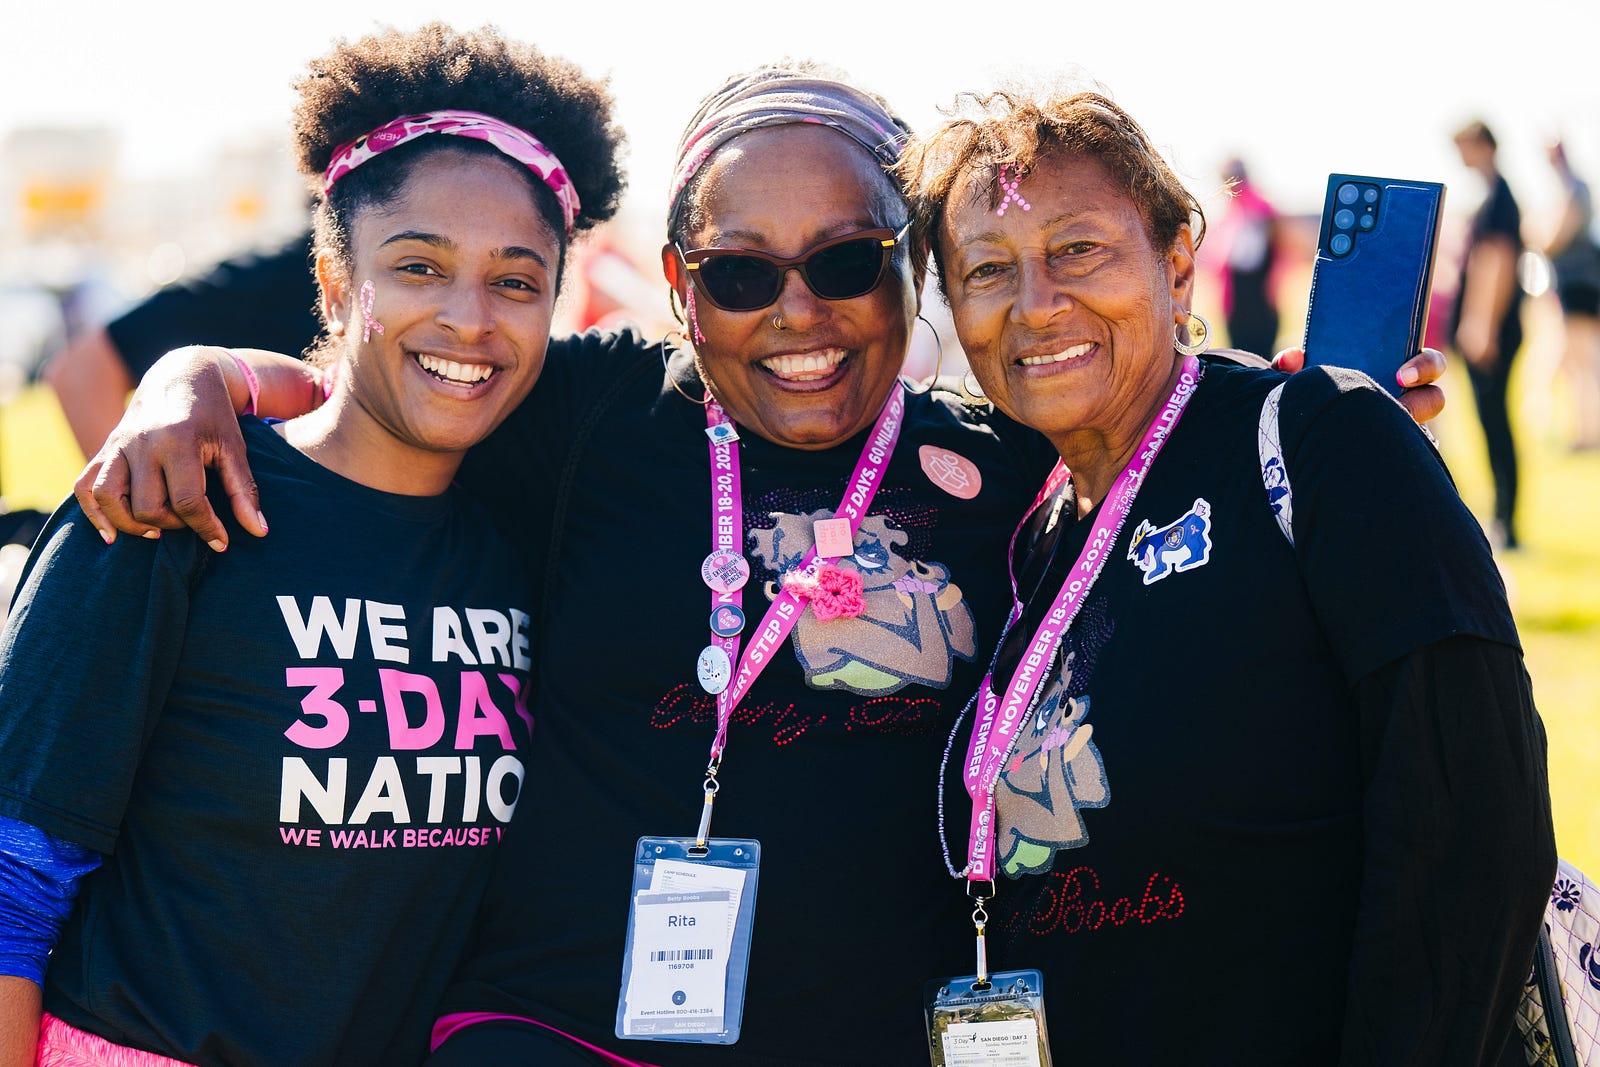 Three black women smile, arms around one another. They wear “We Are 3-Day Nation” T-shirts as they prepare to do a breast cancer fundraising walk. AI-powered chatbots and virtual assistants can give patients 24/7 access to healthcare information, answer questions, and schedule appointments.